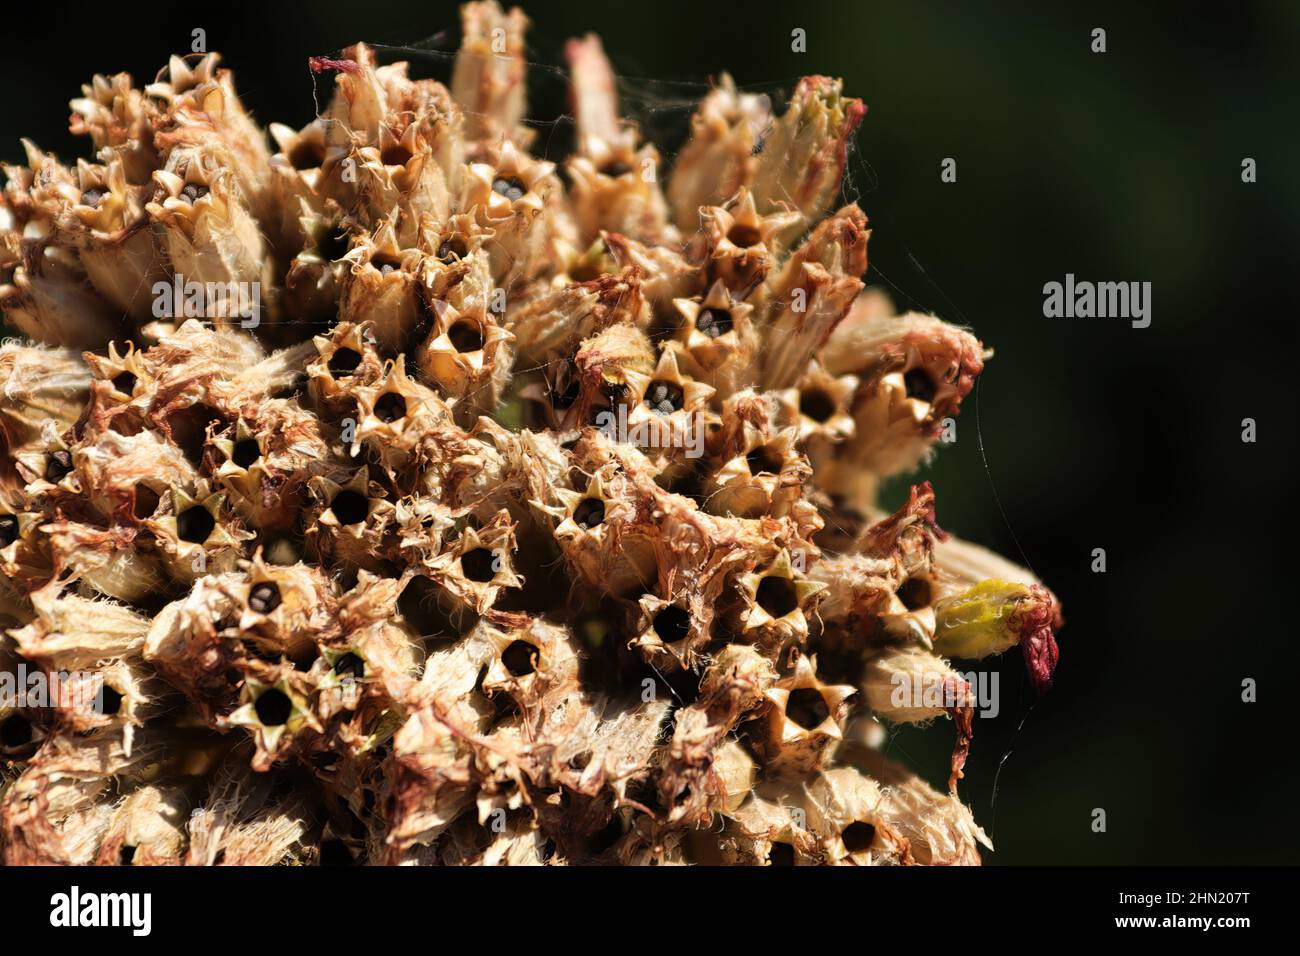 Closeup view of the seed pods on a maltese cross plant Stock Photo